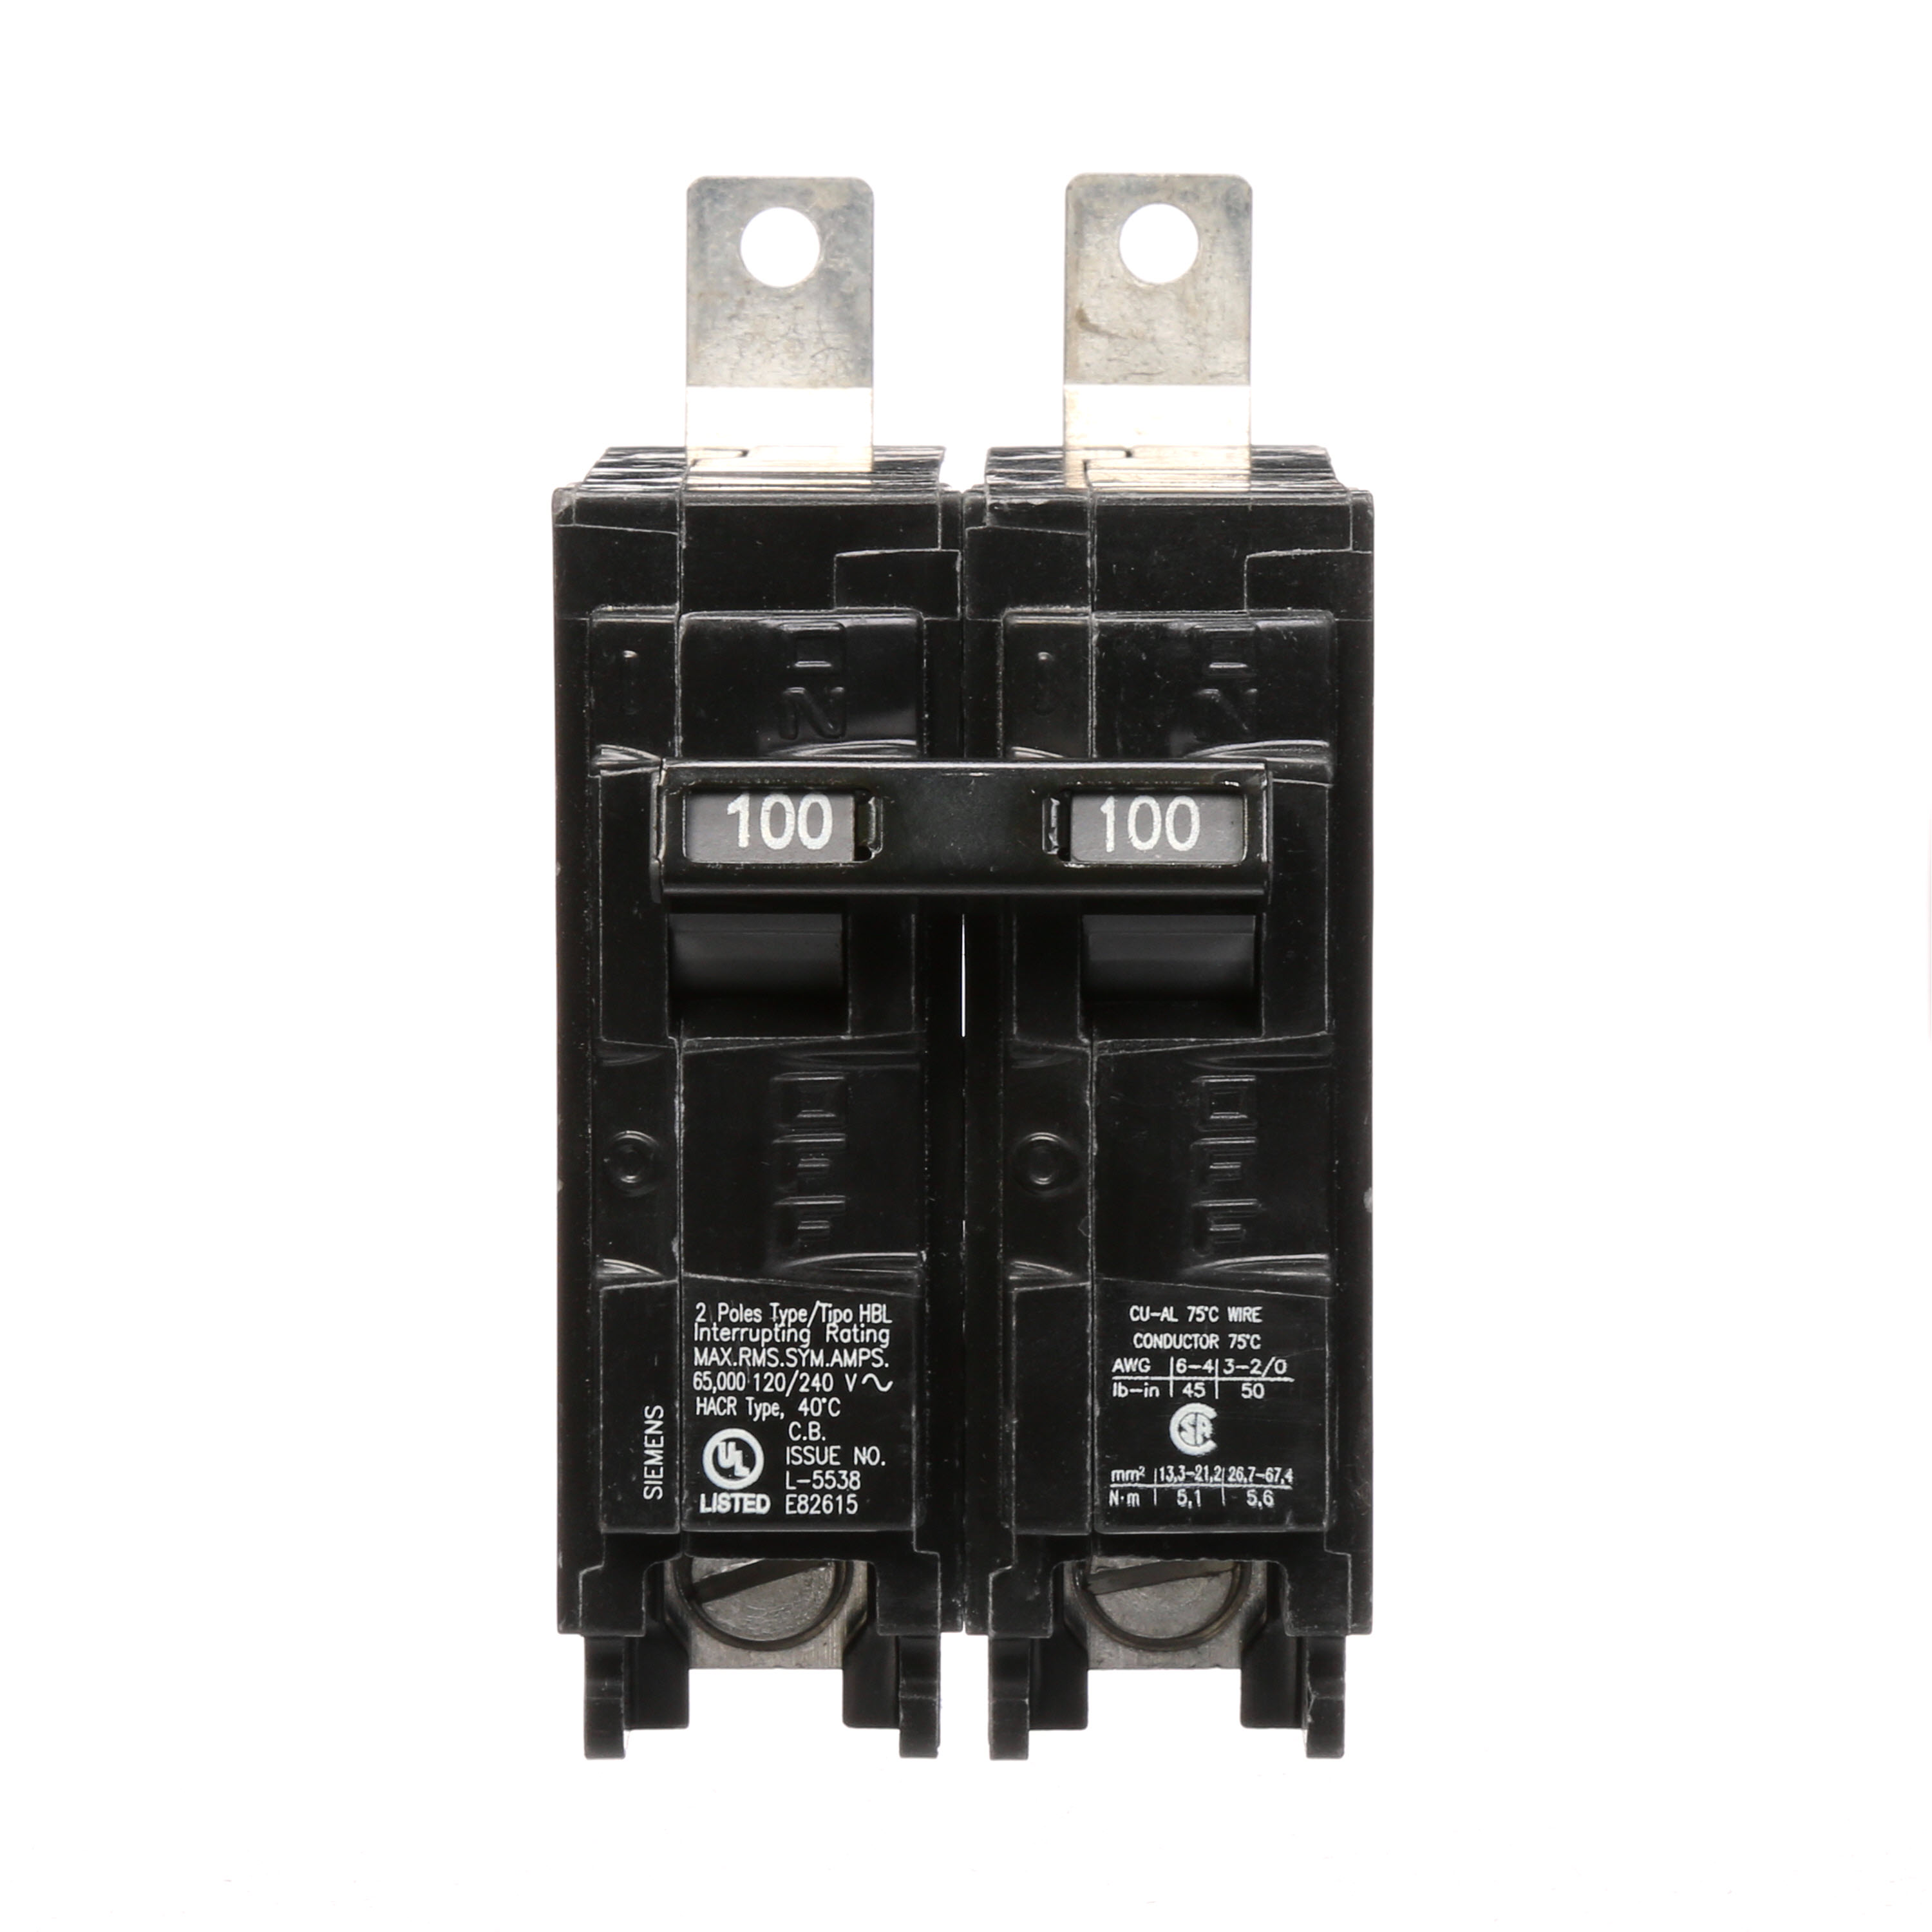 Siemens Low Voltage Molded Case Circuit Breakers Panelboard Mounting 240V Circuit Breakers - Type BL, 2-Pole, 120/240VAC are Circuit Protection Molded Case Circuit Breakers. Type HBL Application Electrical Distribution Standard UL 489 Voltage Rating 120/240V A mperage Rating 100A Trip Range Thermal Magnetic Interrupt Rating 65 AIC Number Of Poles 2P